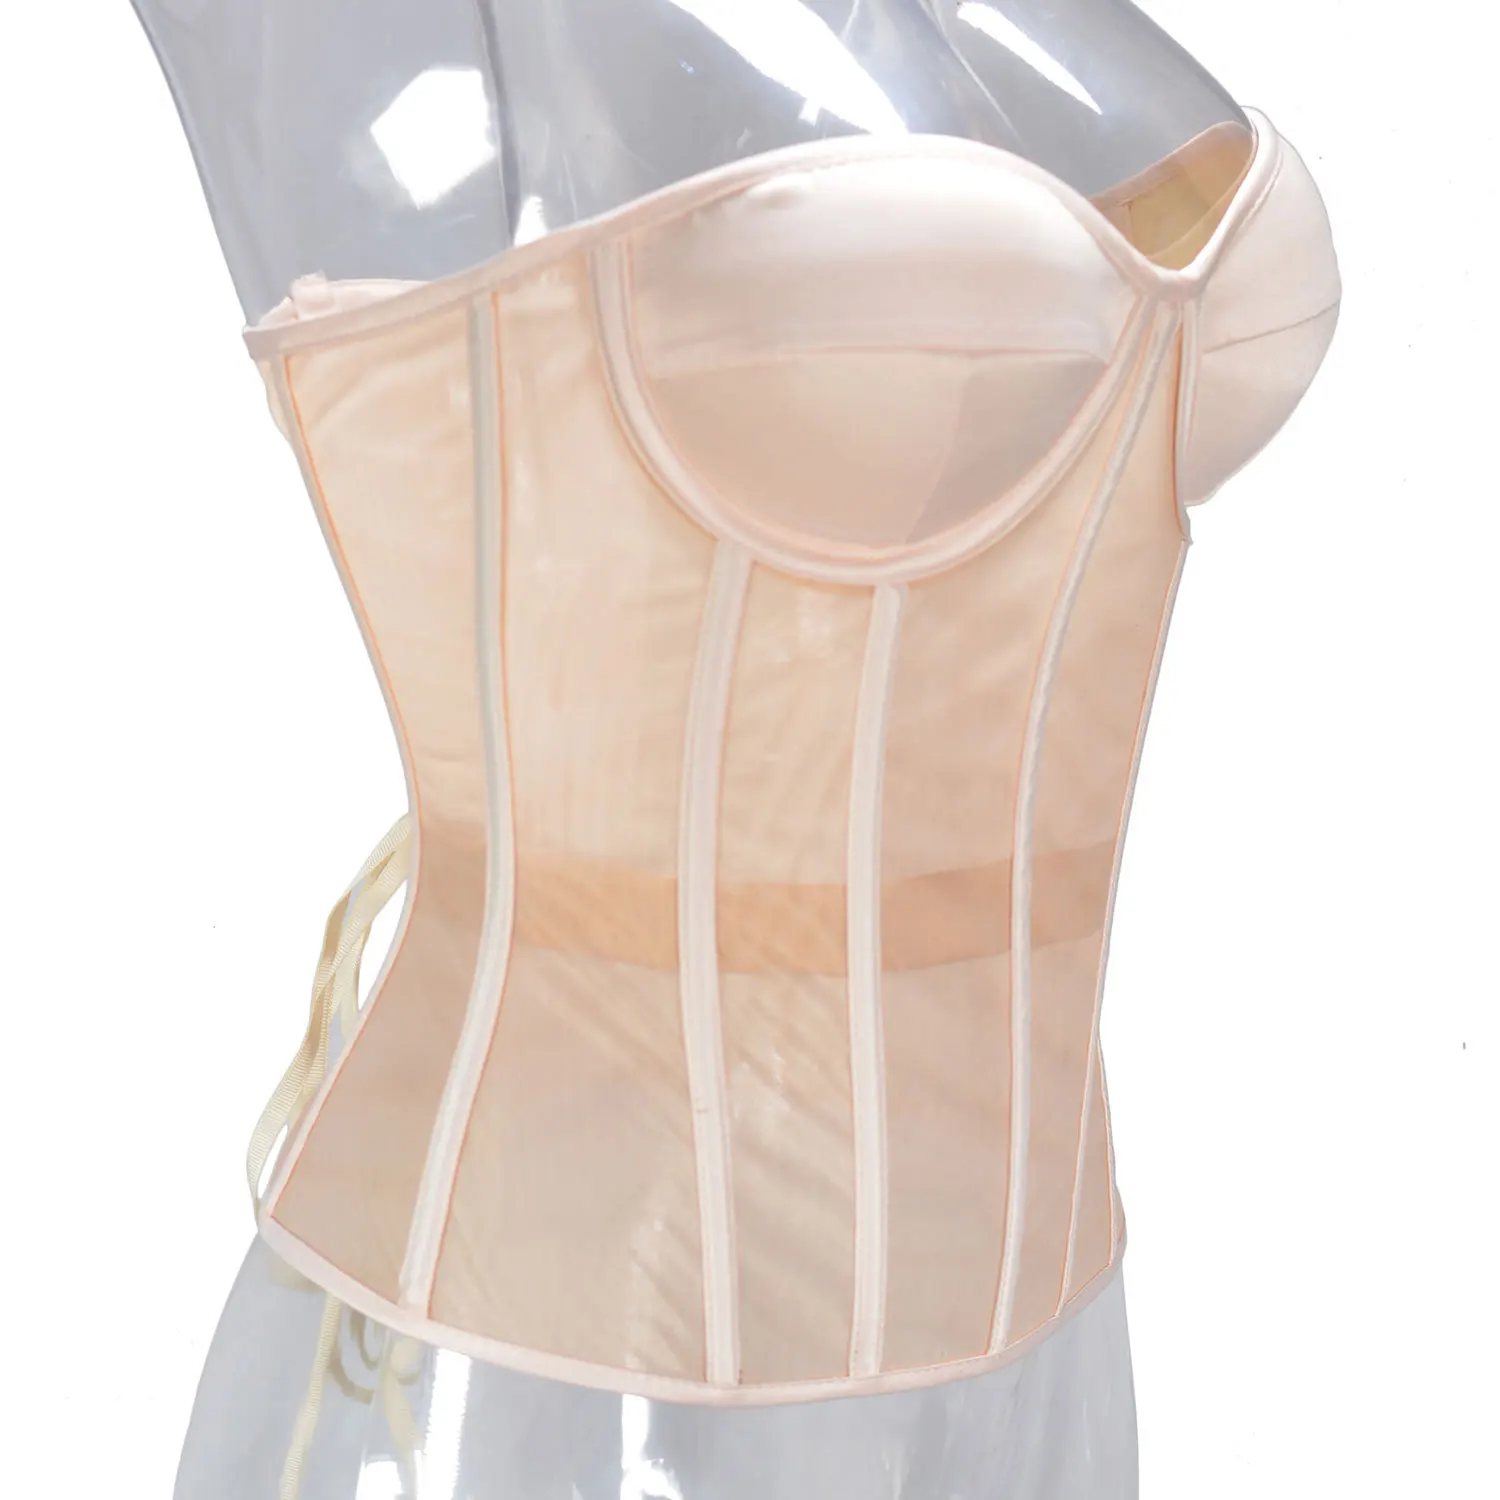 

Abdominal Corset Double Layer Transparent Mesh Breathable Bustiers With Bra Lace Up Bones Bodices Beige XS TO 3XL For Dresses